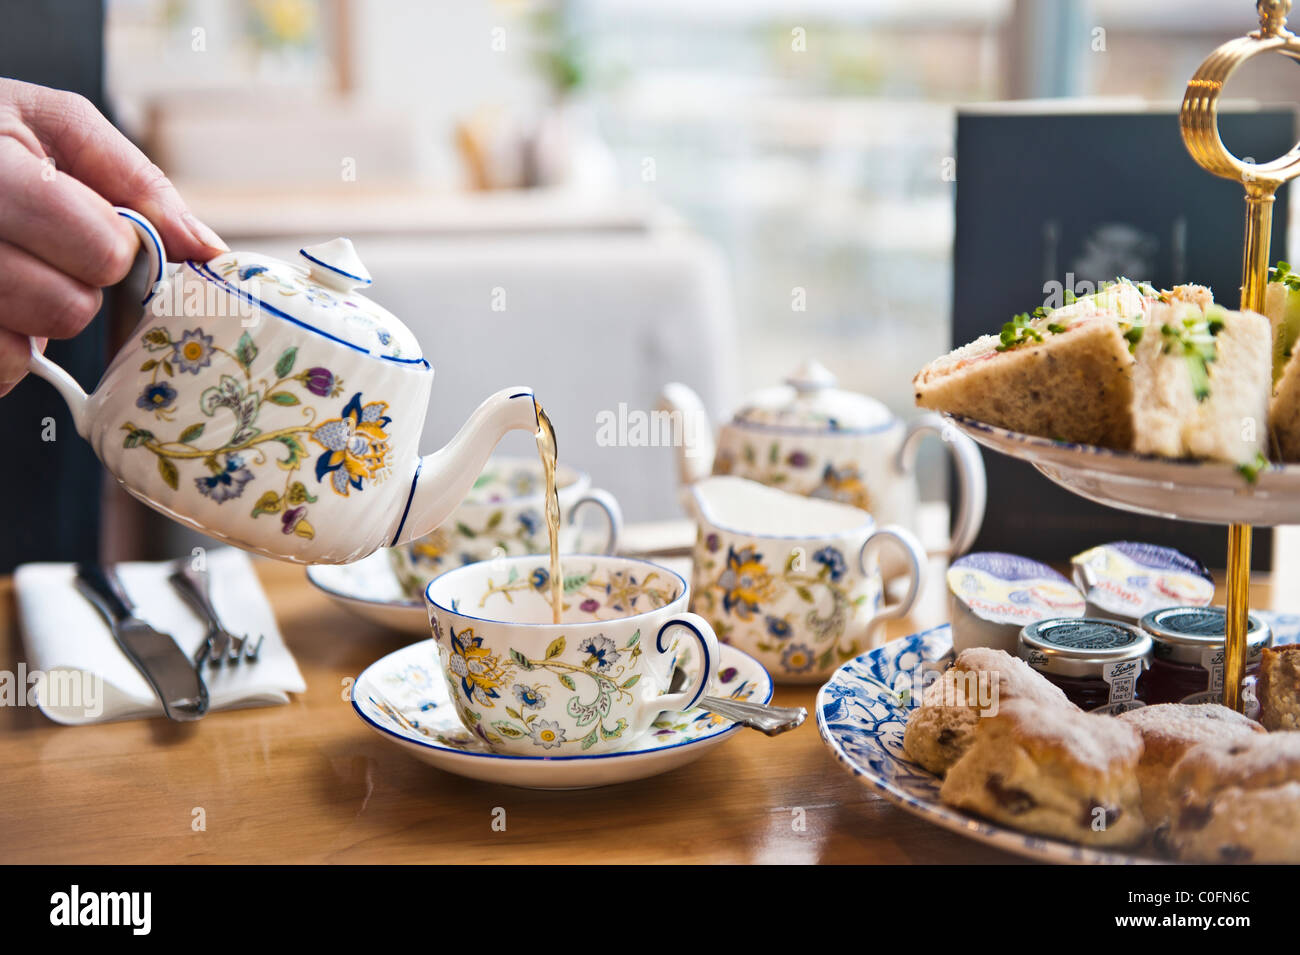 Typical English tea being poured from teapot Stock Photo